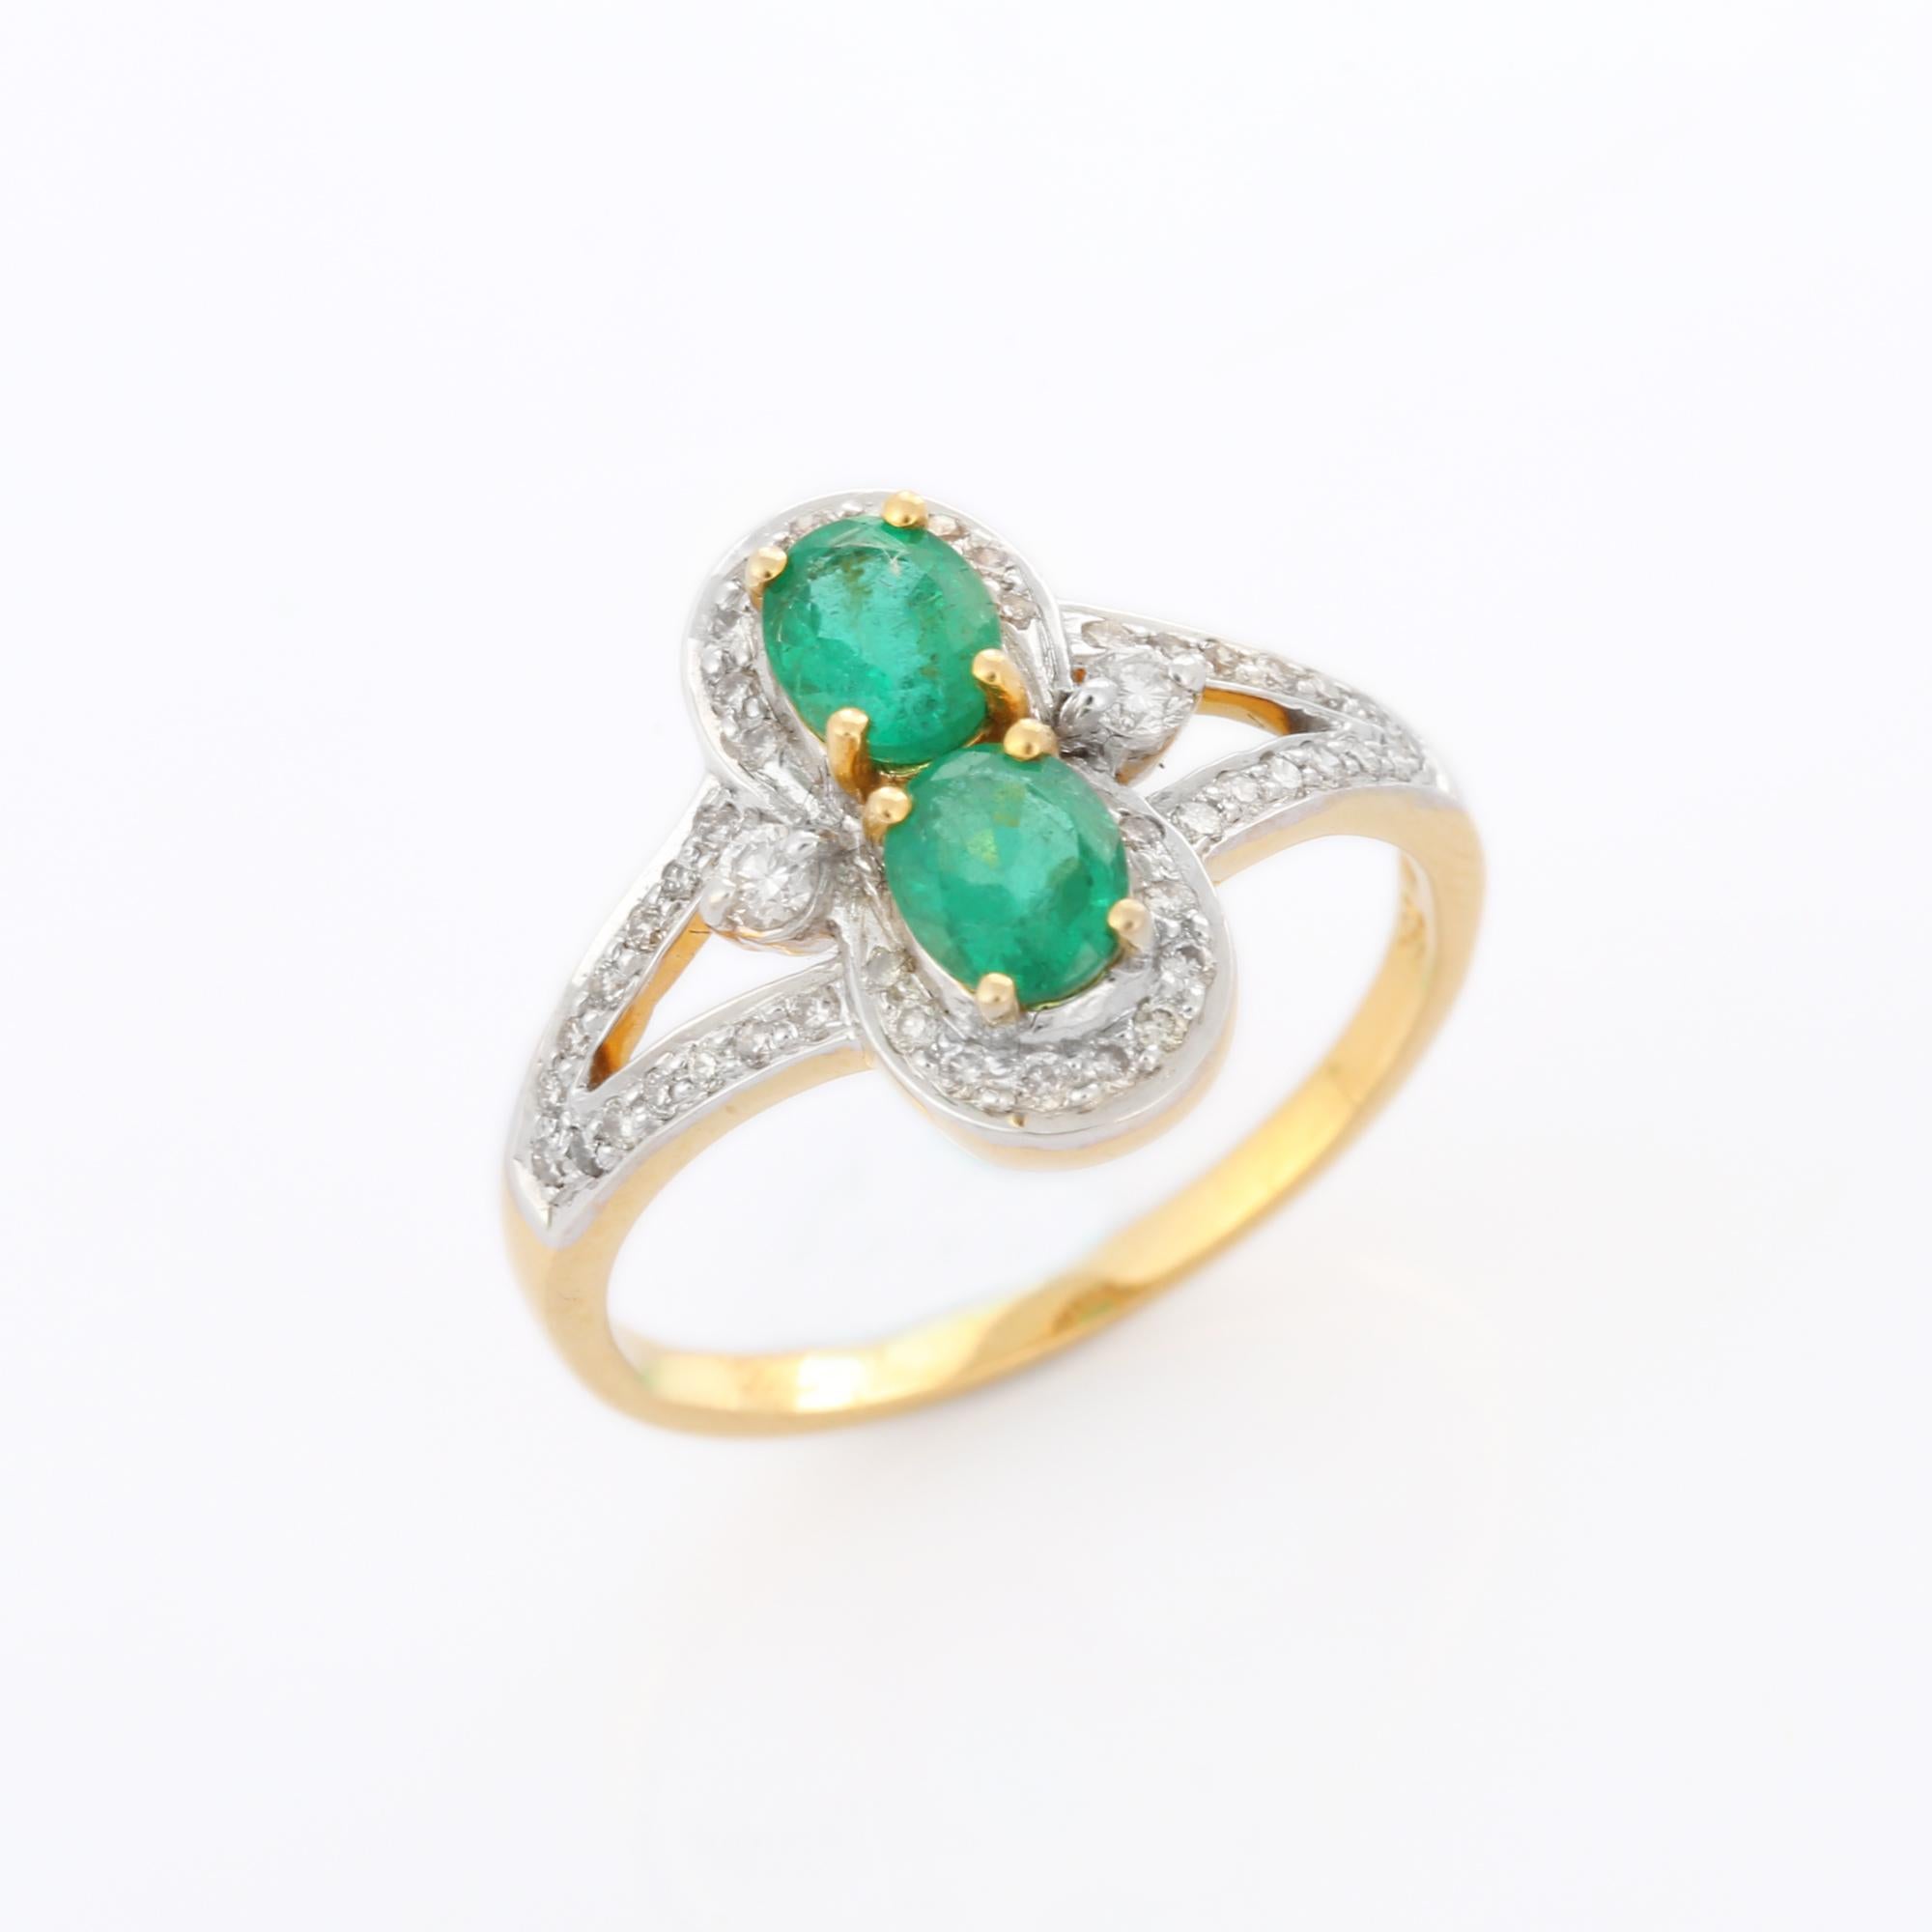 For Sale:  Magnificent Two Emerald Wedding Ring with Halo Diamonds in 18K Yellow Gold  4